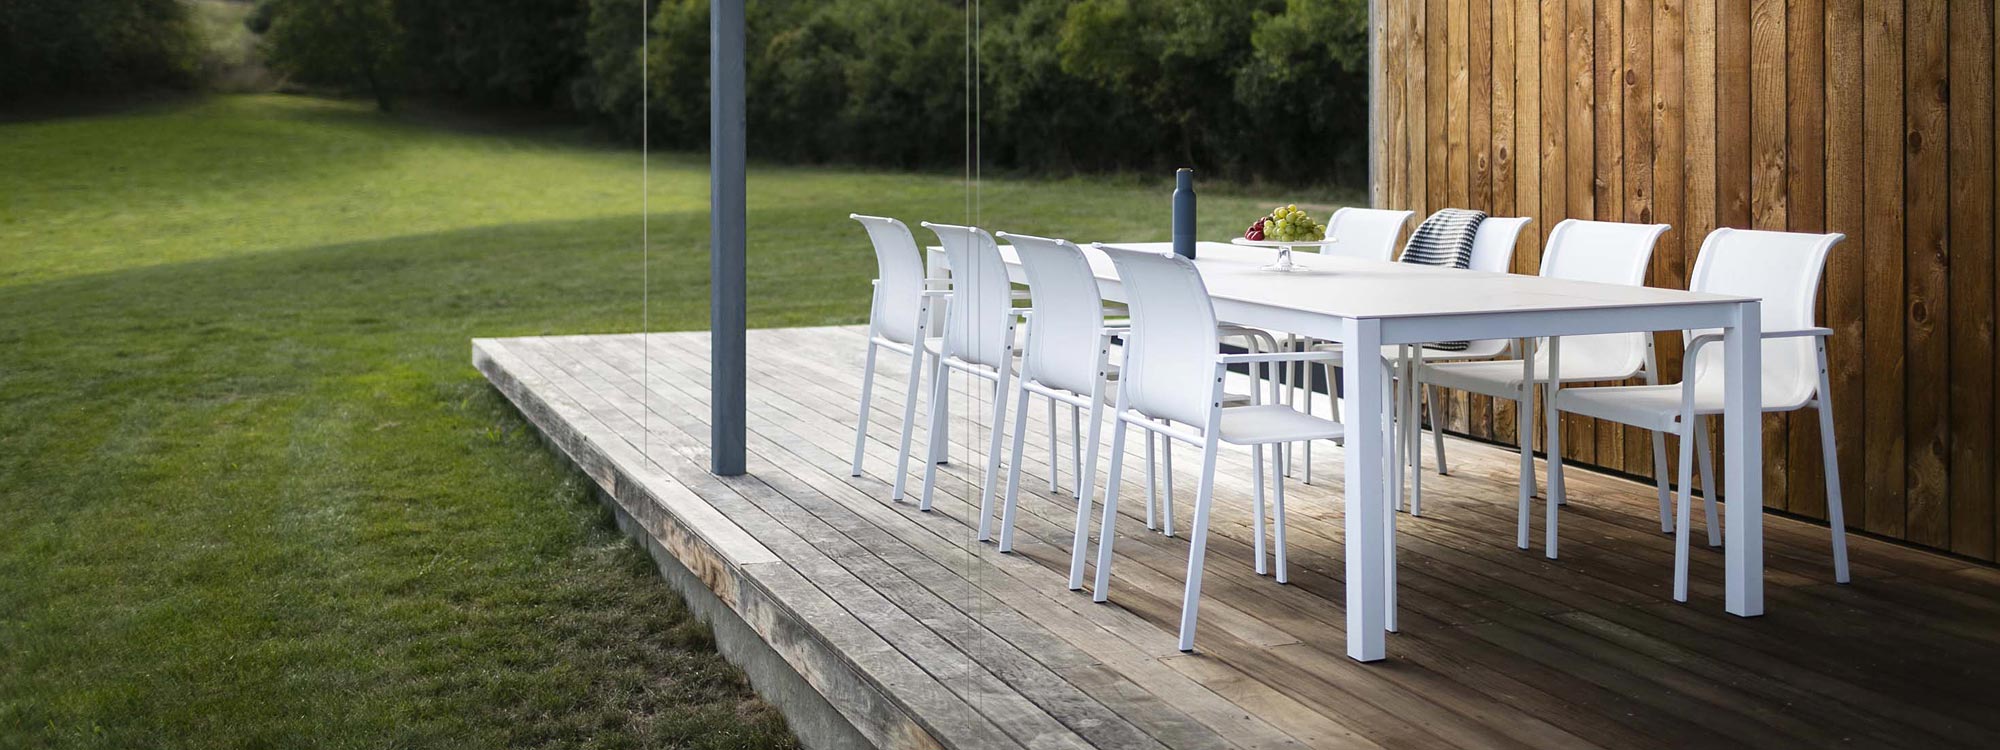 Image of Puro large white garden table and Puro white carver chairs on wooden decked veranda